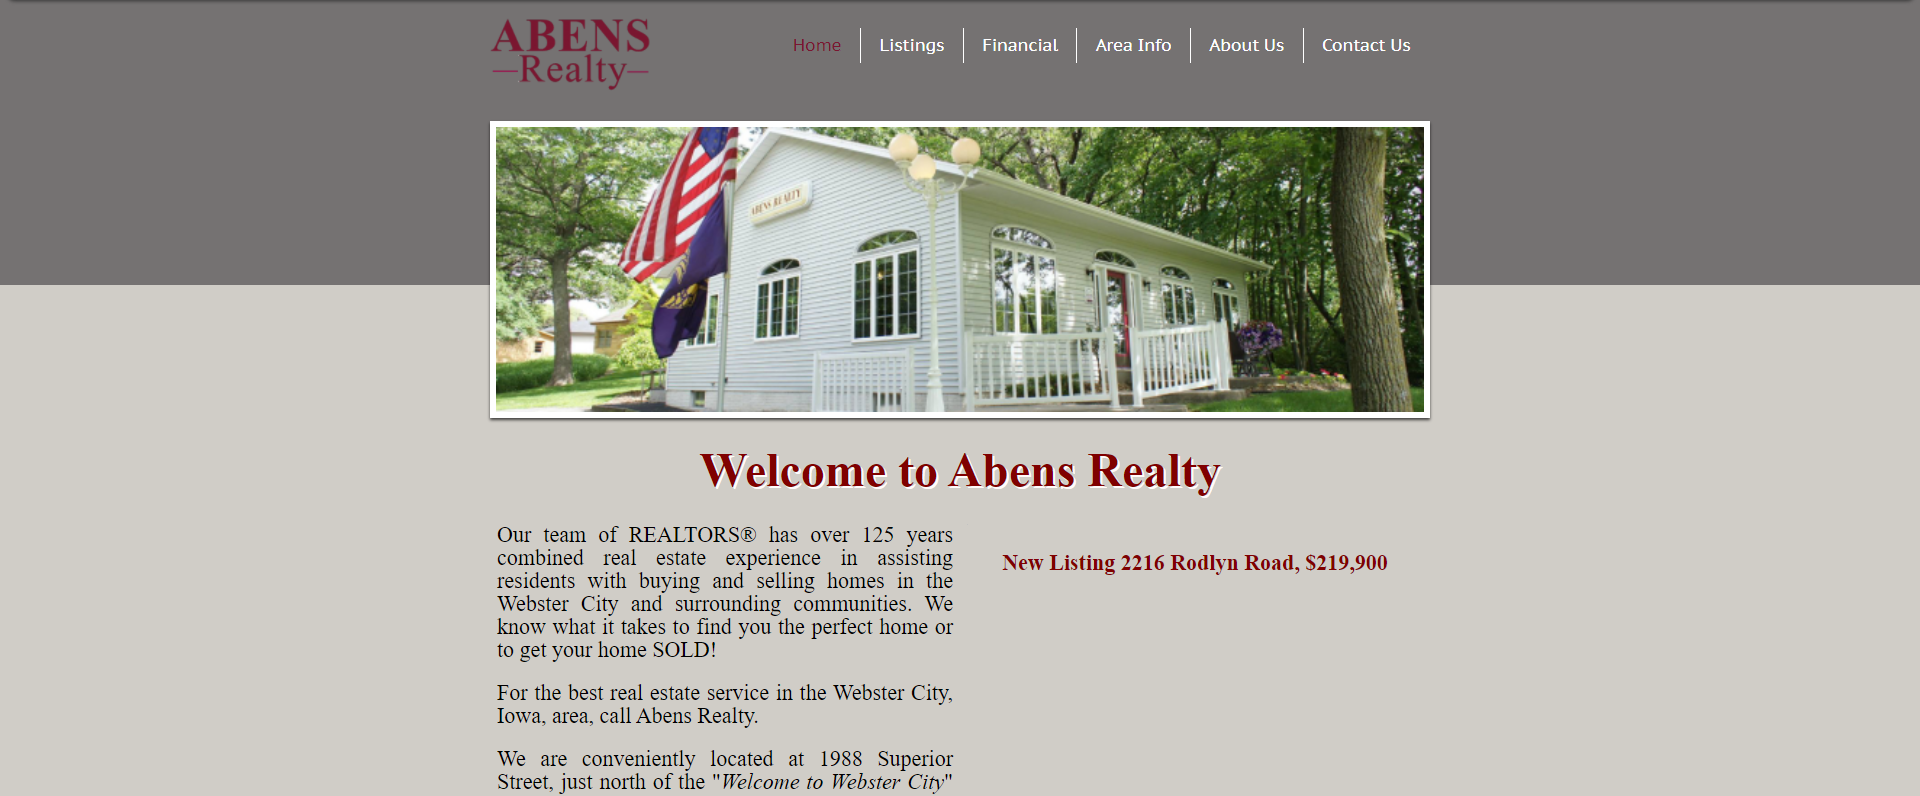 Screenshot of previous website design for Abens Realty